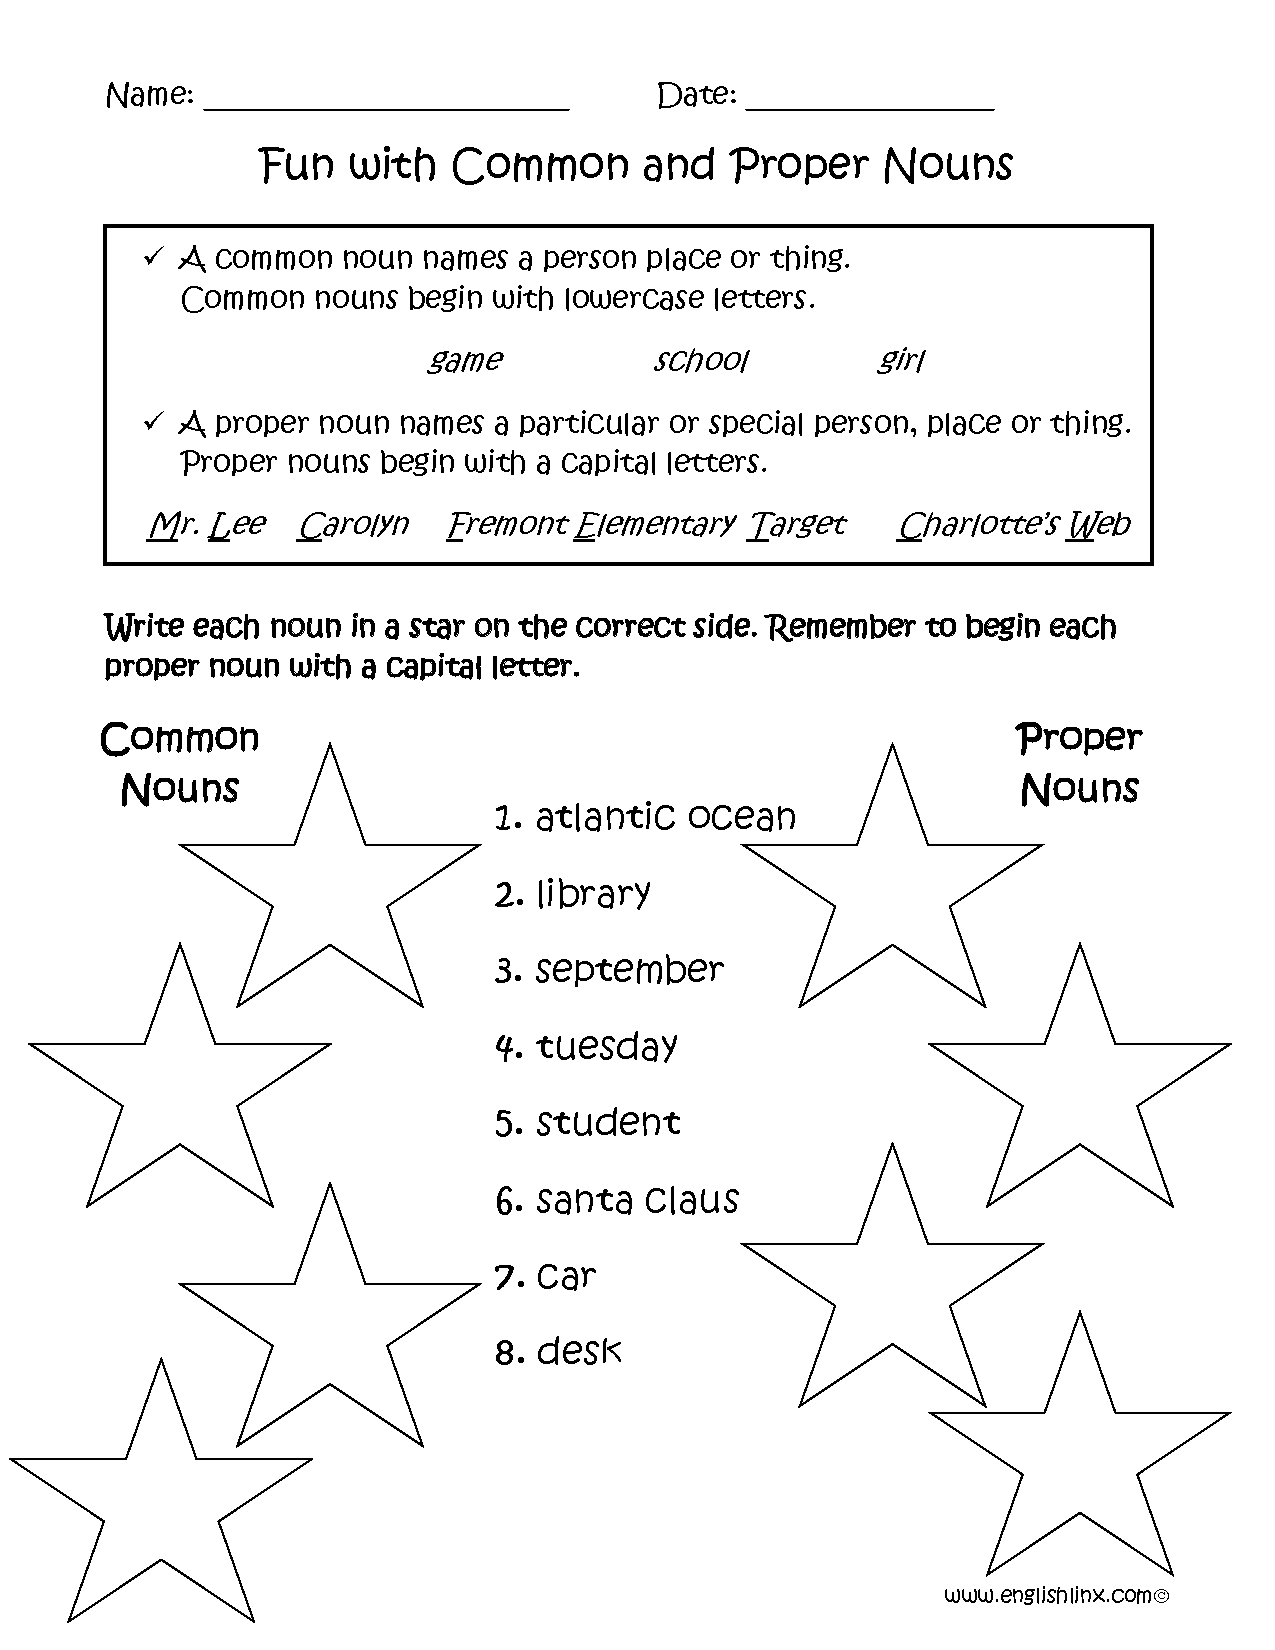 Nouns Worksheets  Proper And Common Nouns Worksheets Together With Fun Worksheets For 3Rd Grade